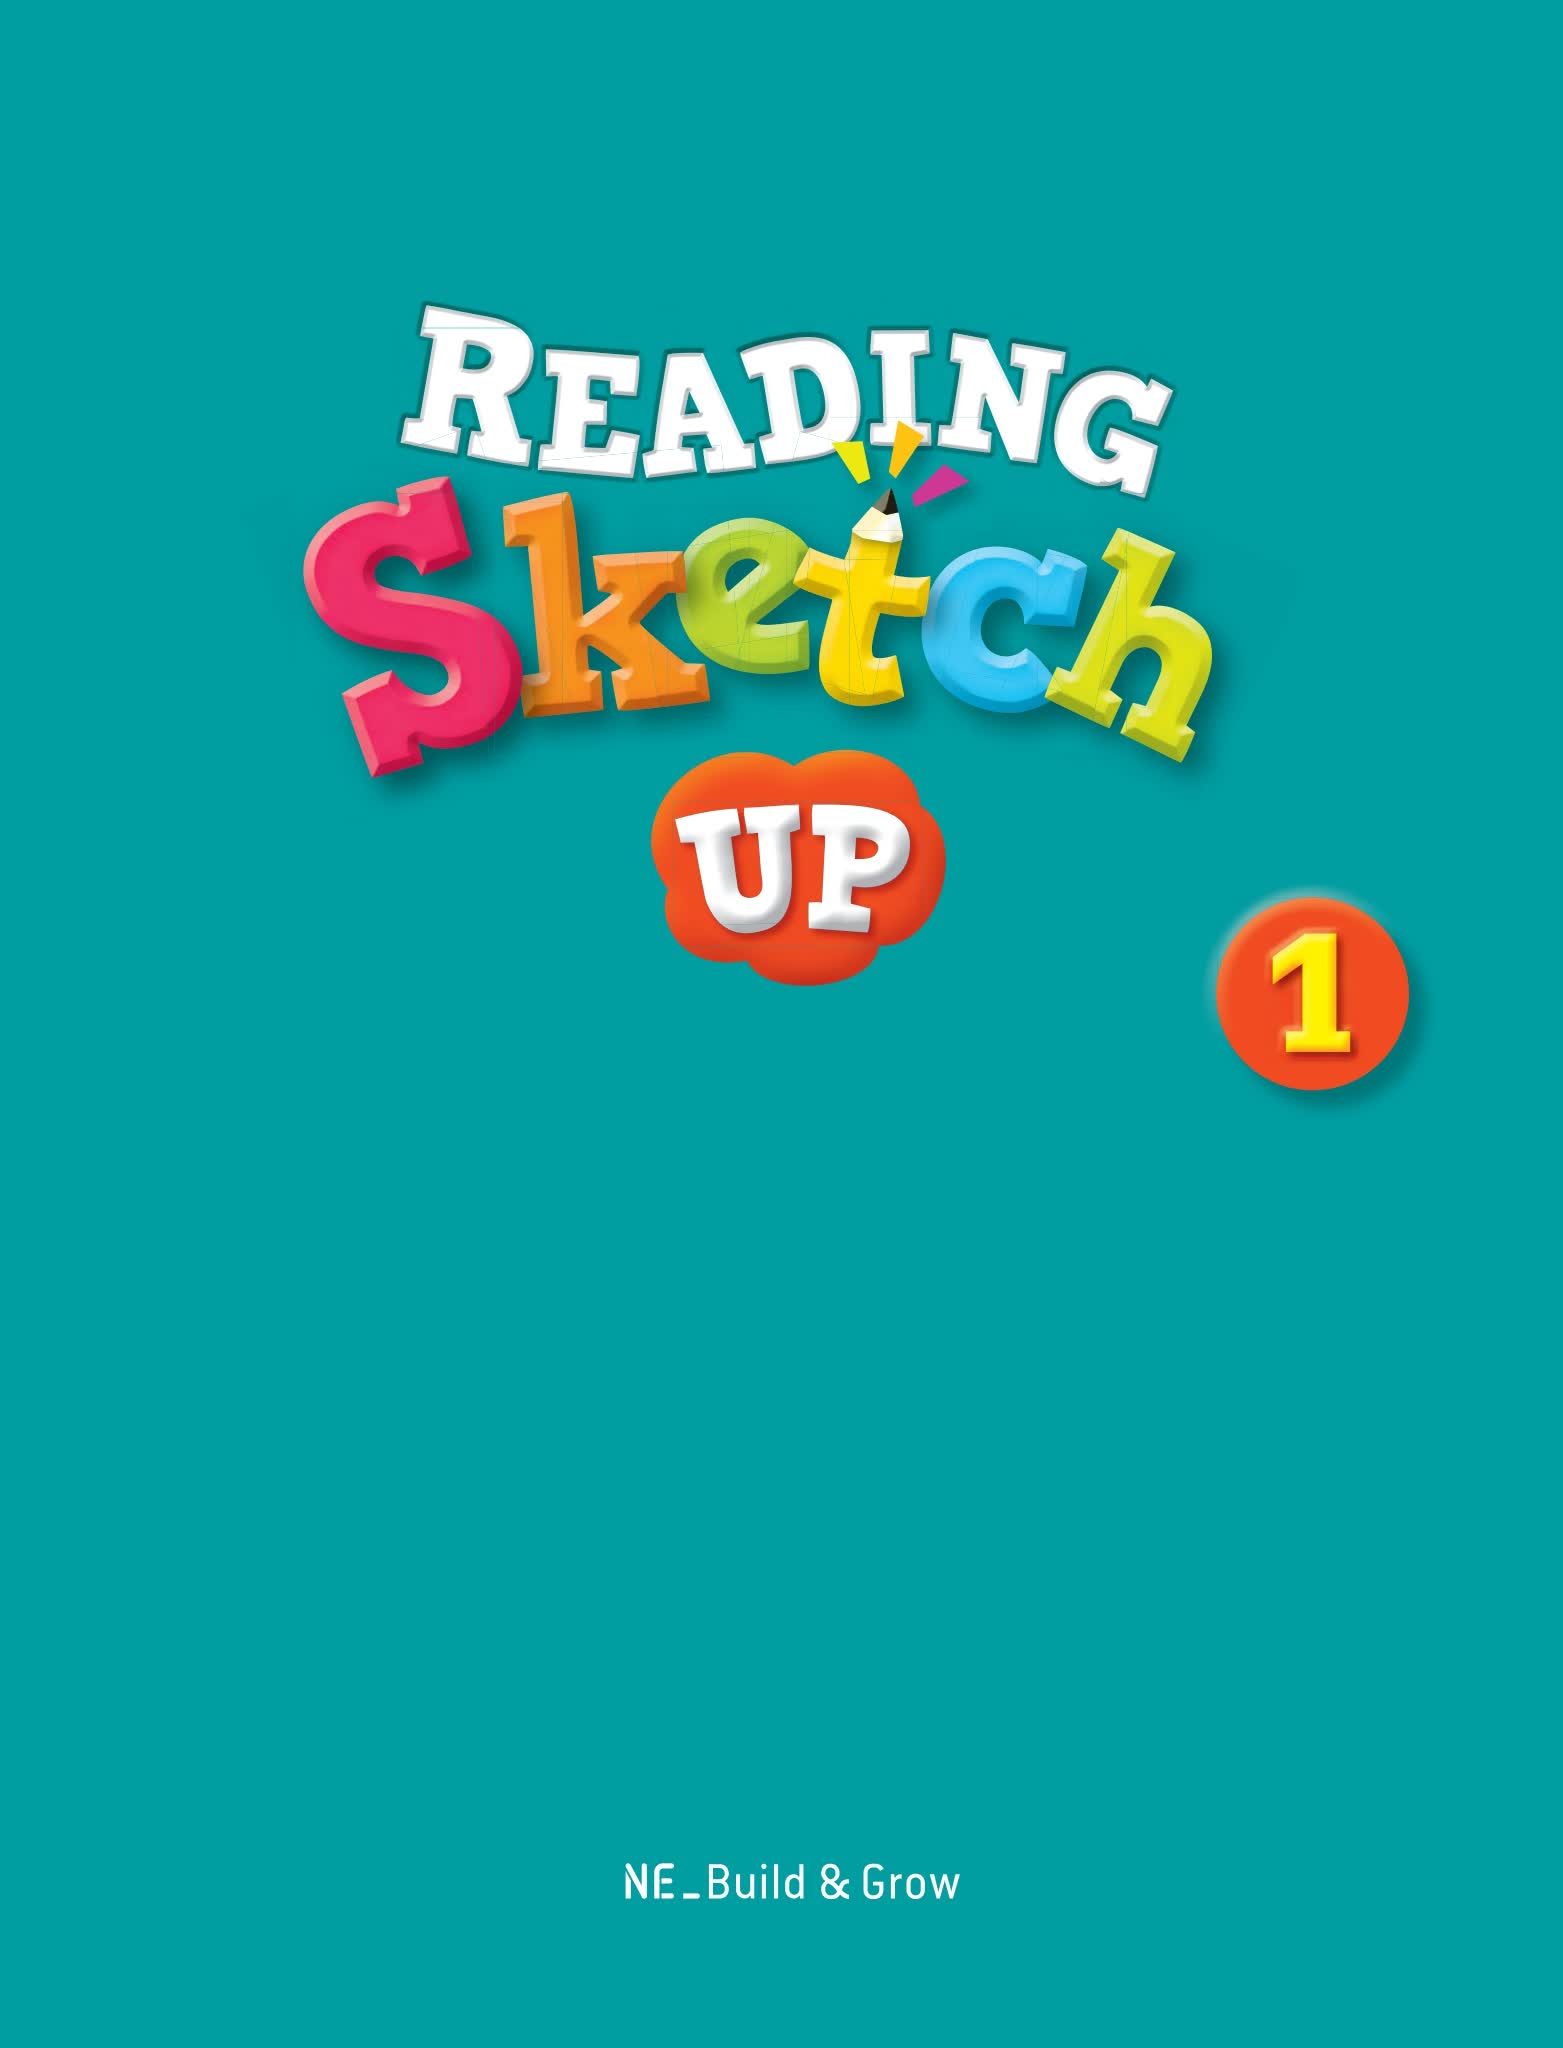 Reading_Sketch_Up